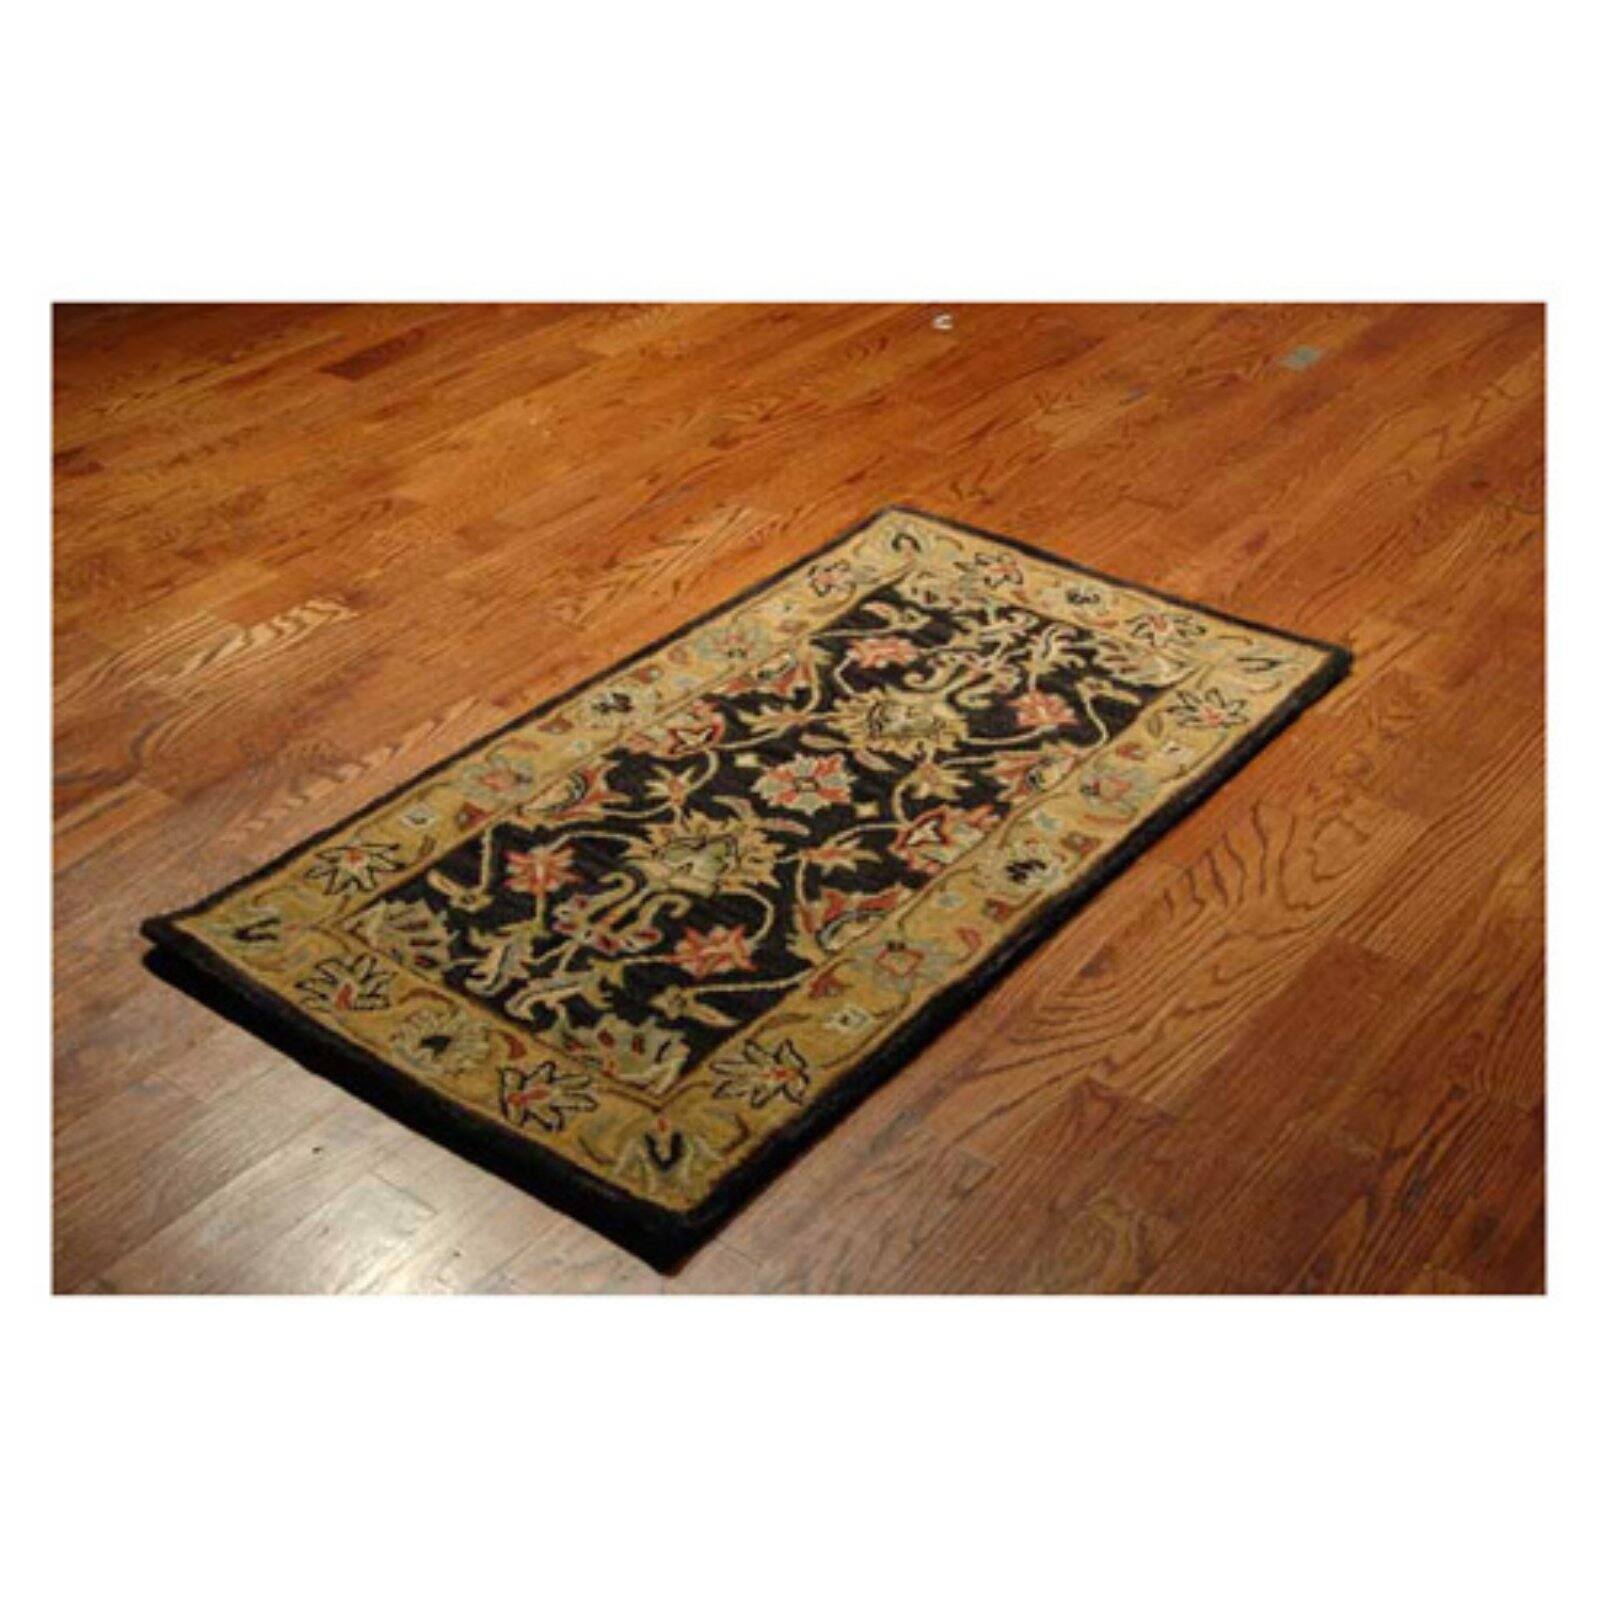 SAFAVIEH Heritage Regis Traditional Wool Area Rug, Charcoal/Gold, 9'6" x 13'6" - image 2 of 10